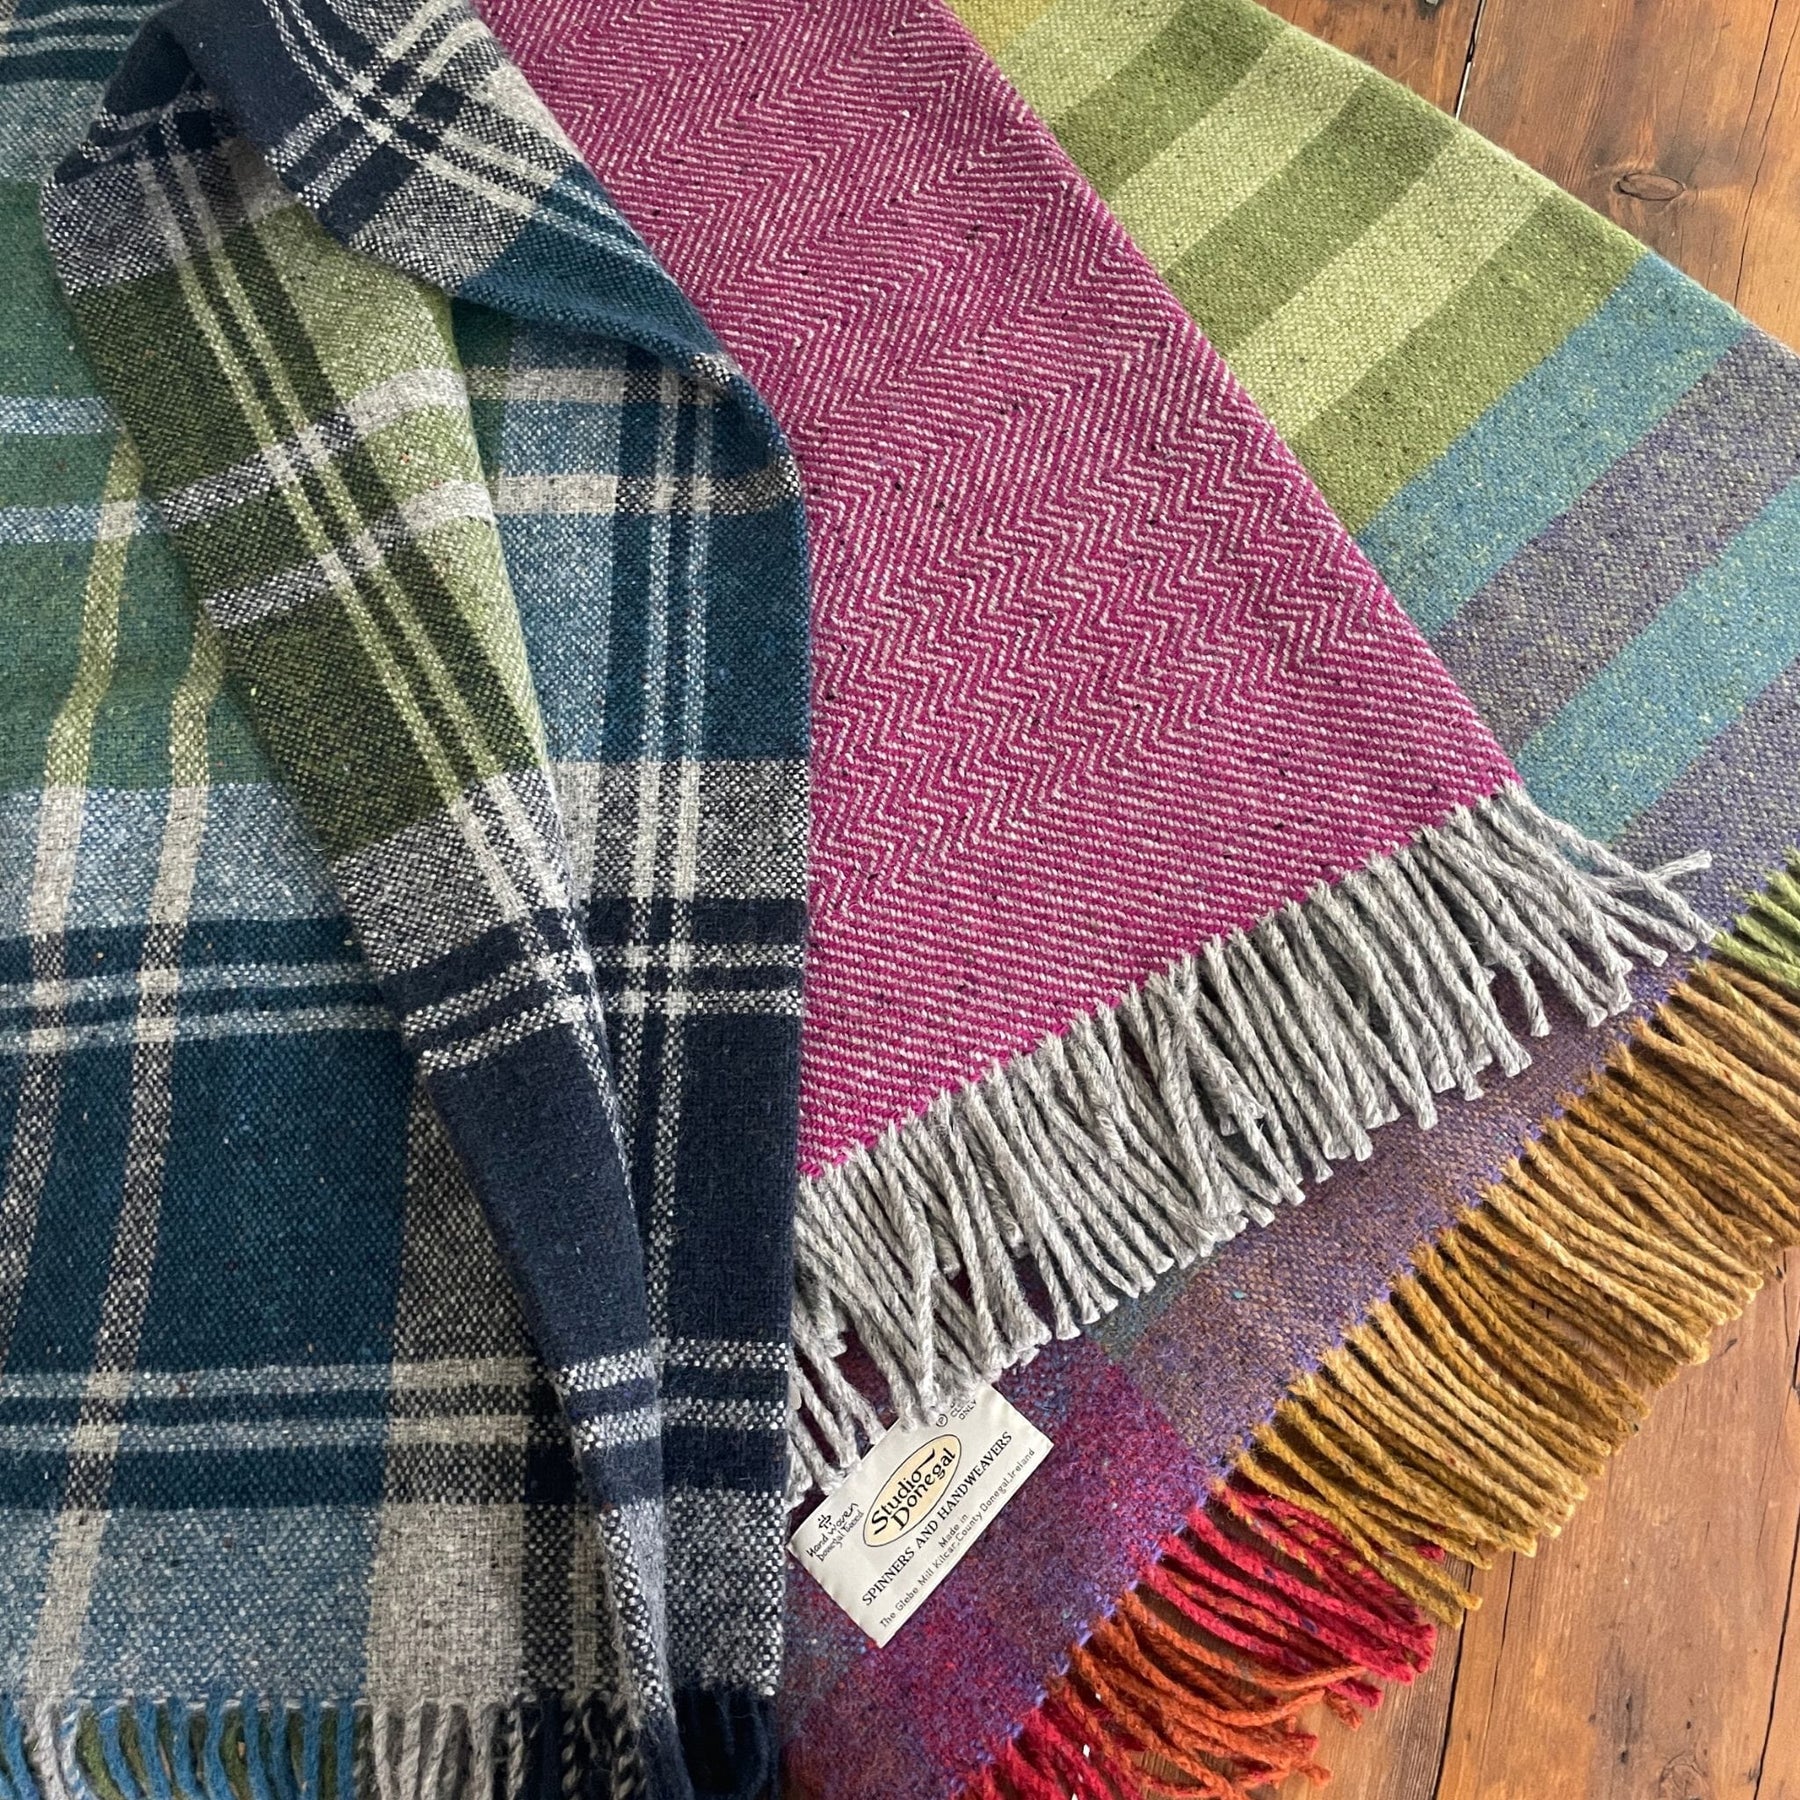 Studio Donegal Blankets – The Woolly Thistle